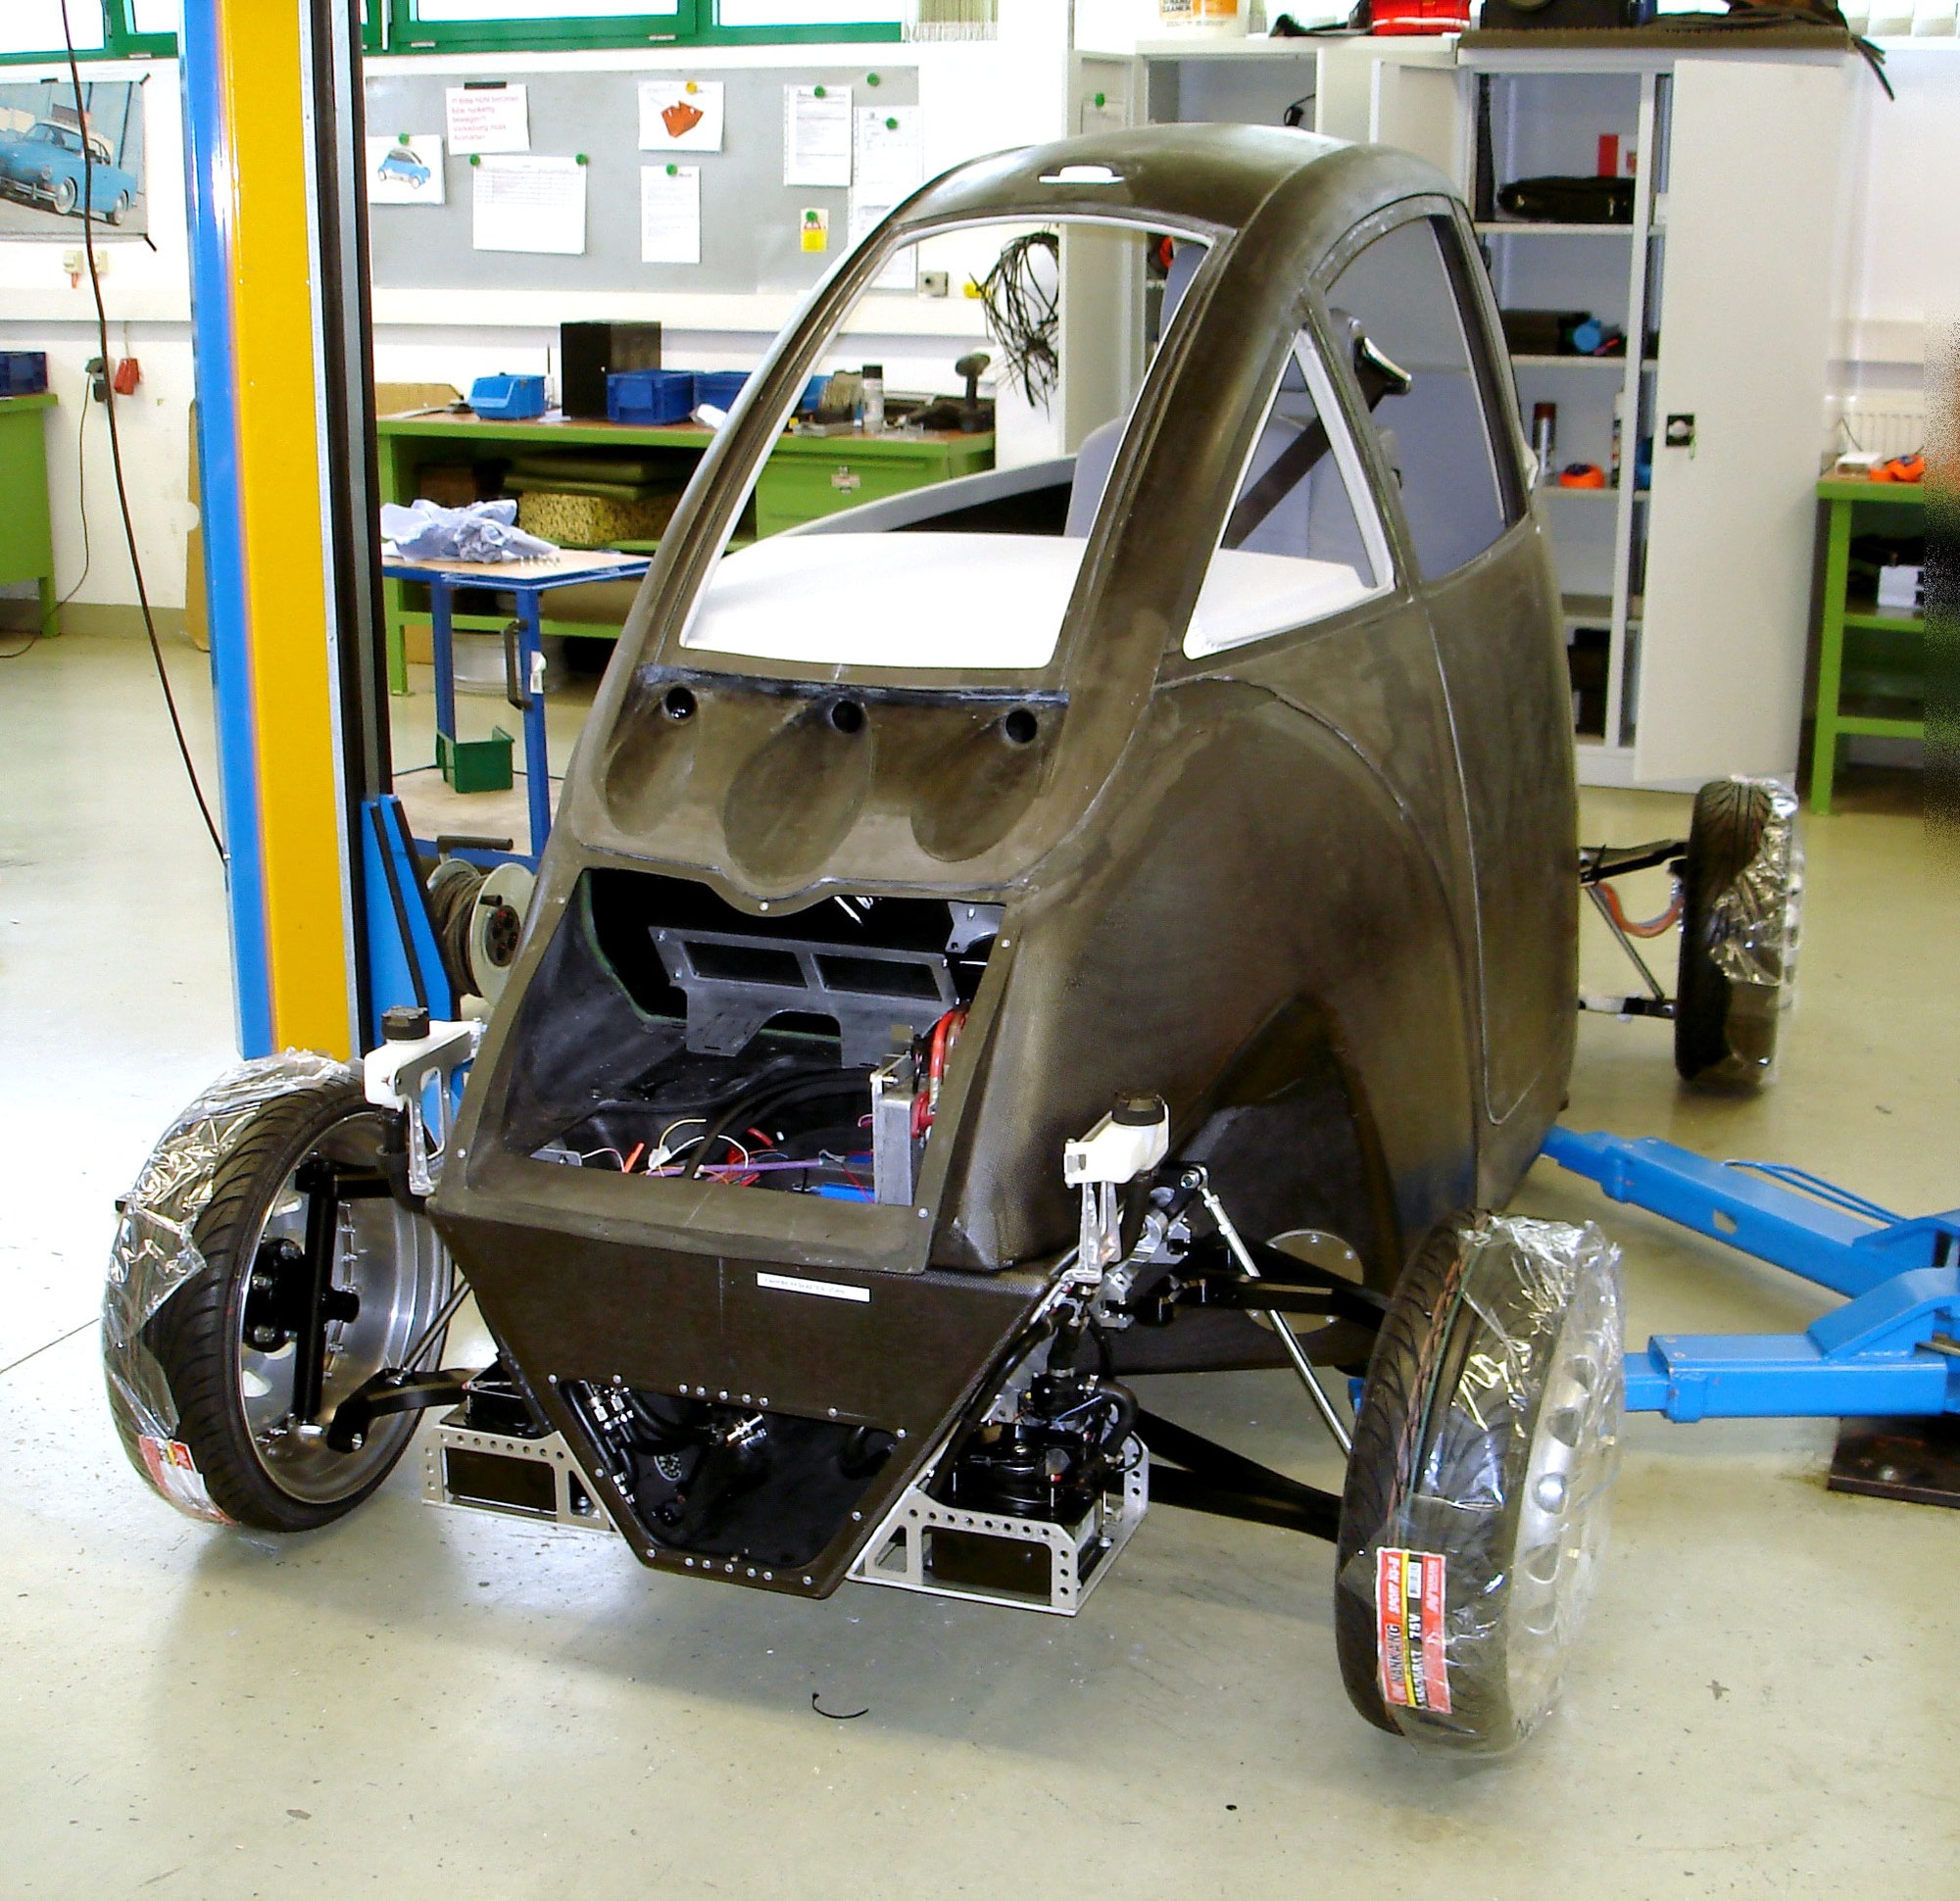 'Marriage' of chassis and bodywork